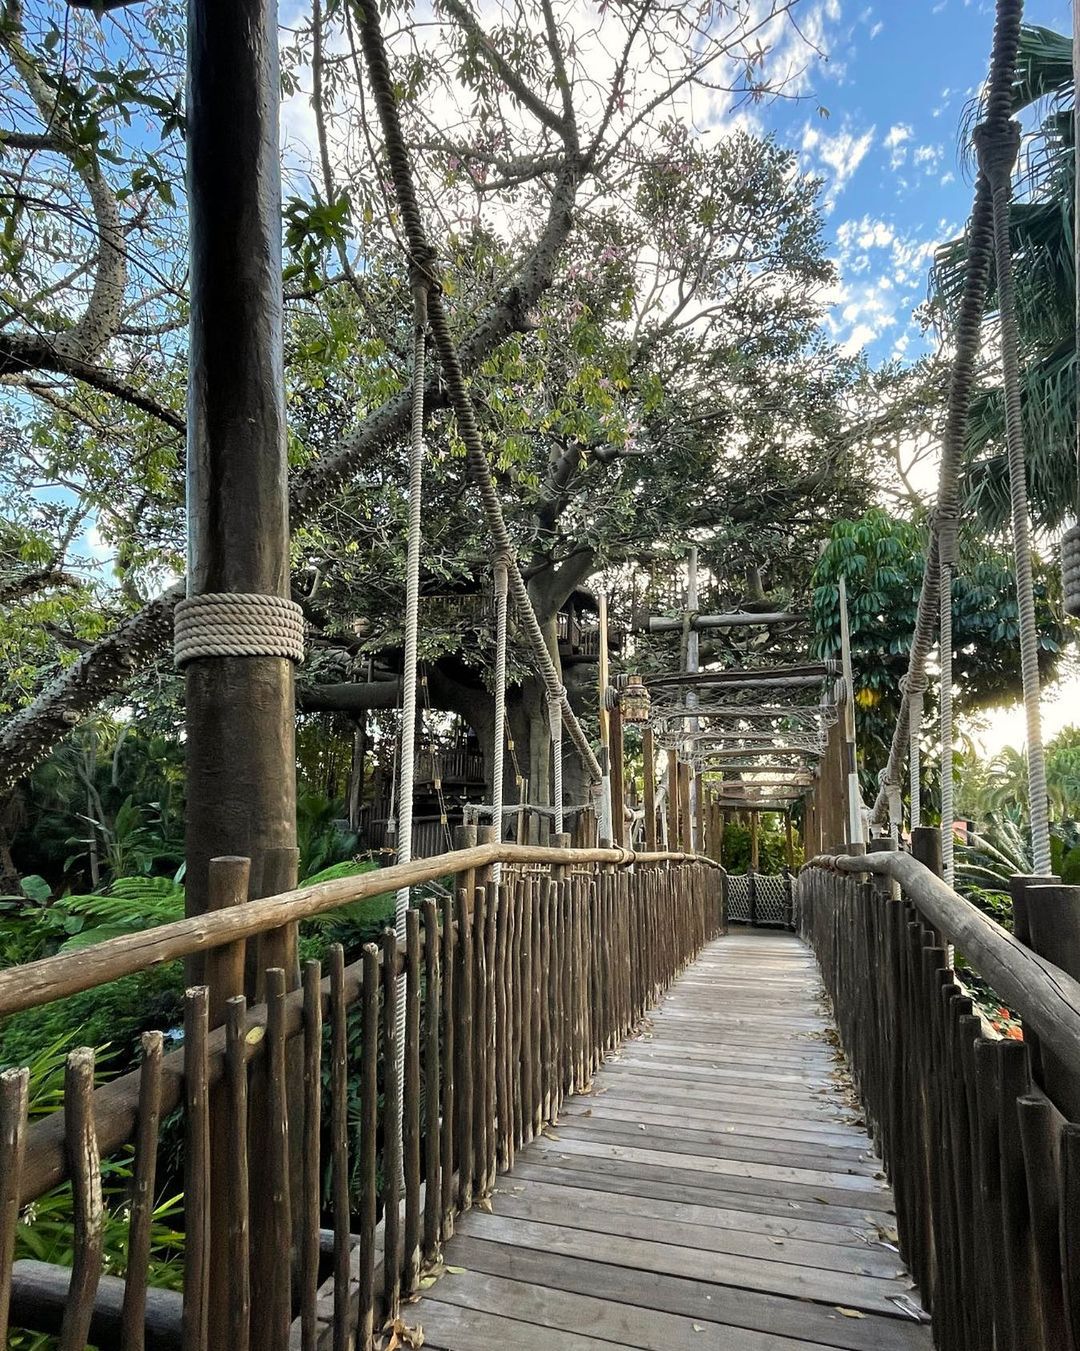 Swiss Family Treehouse - Different Attraction at Magic Kingdom